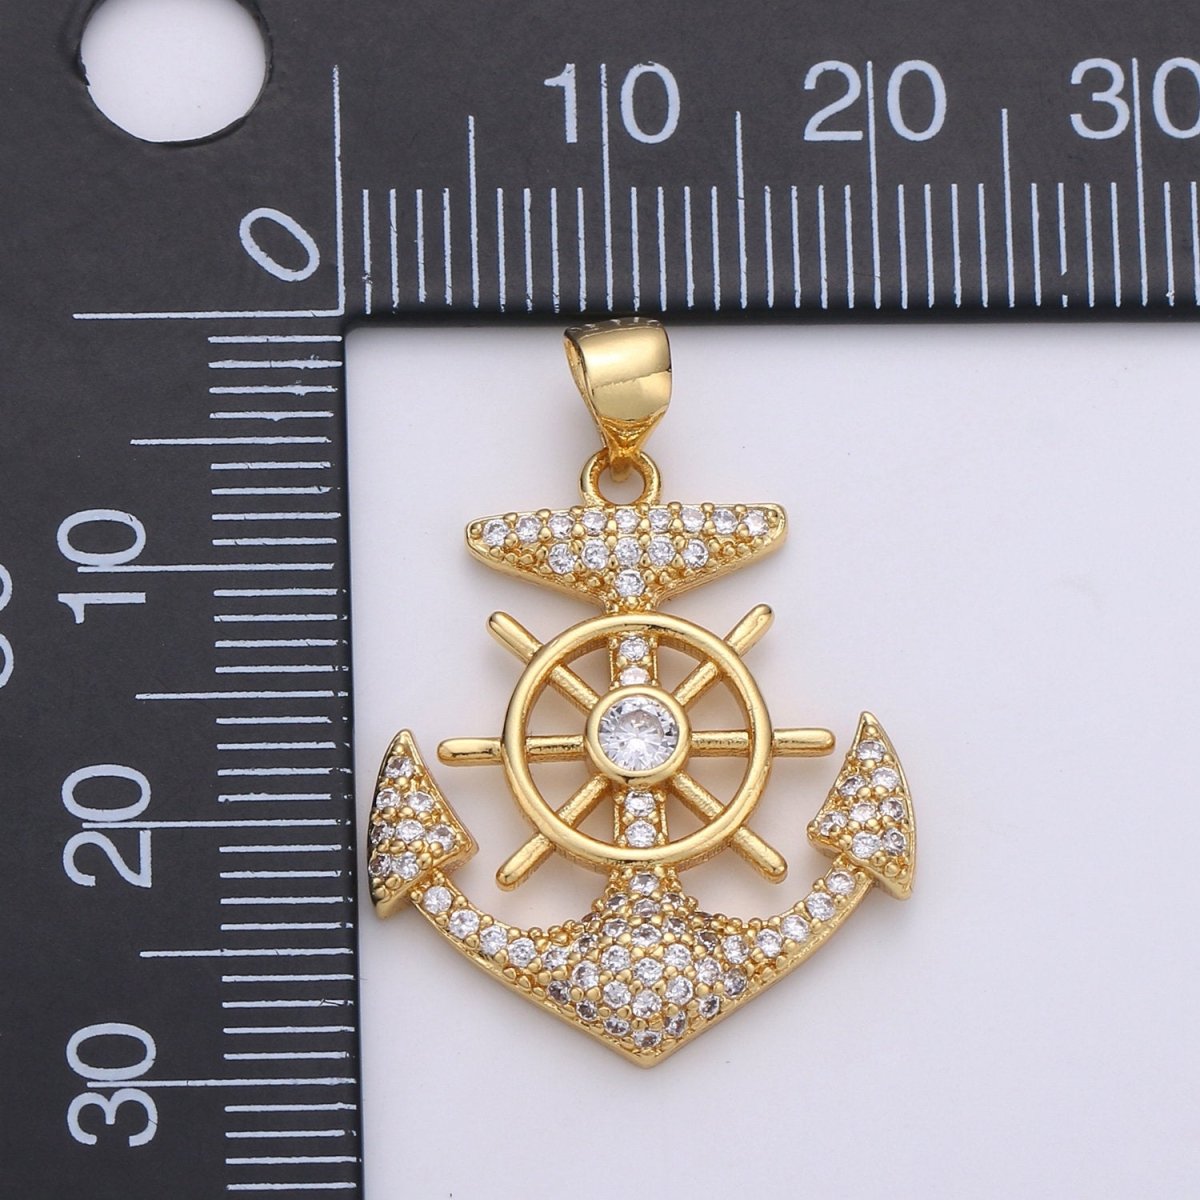 14K Gold Filled Anchor Pendant Craft Supplies For Necklace Bracelet Jewelry Making Micro Pave Sailor Charm J-001 - DLUXCA